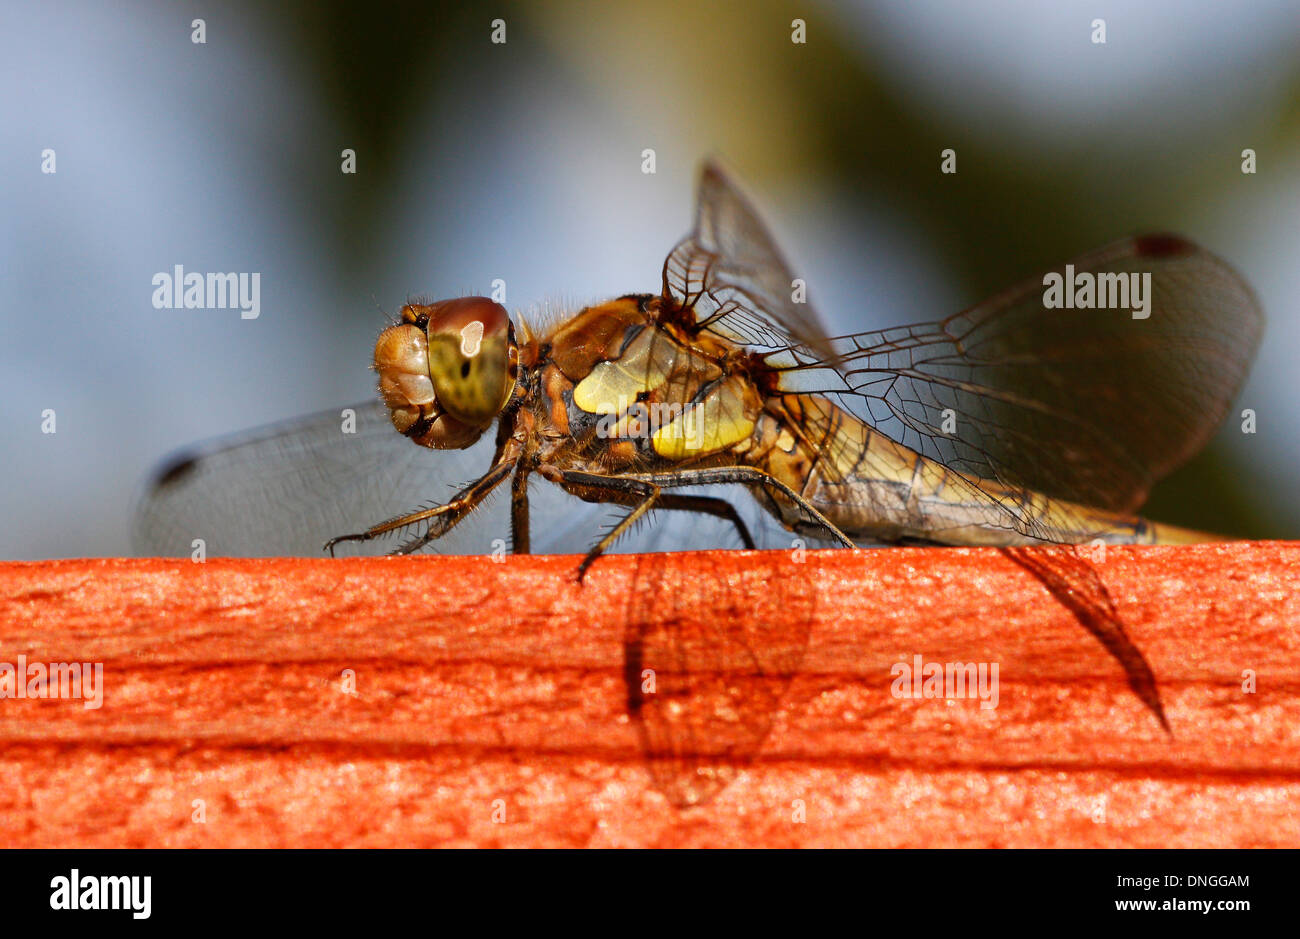 Dragonfly resting on a garden fence, photographed in very high detail.  The Dragonfly looked as if it was looking at the camera. Stock Photo